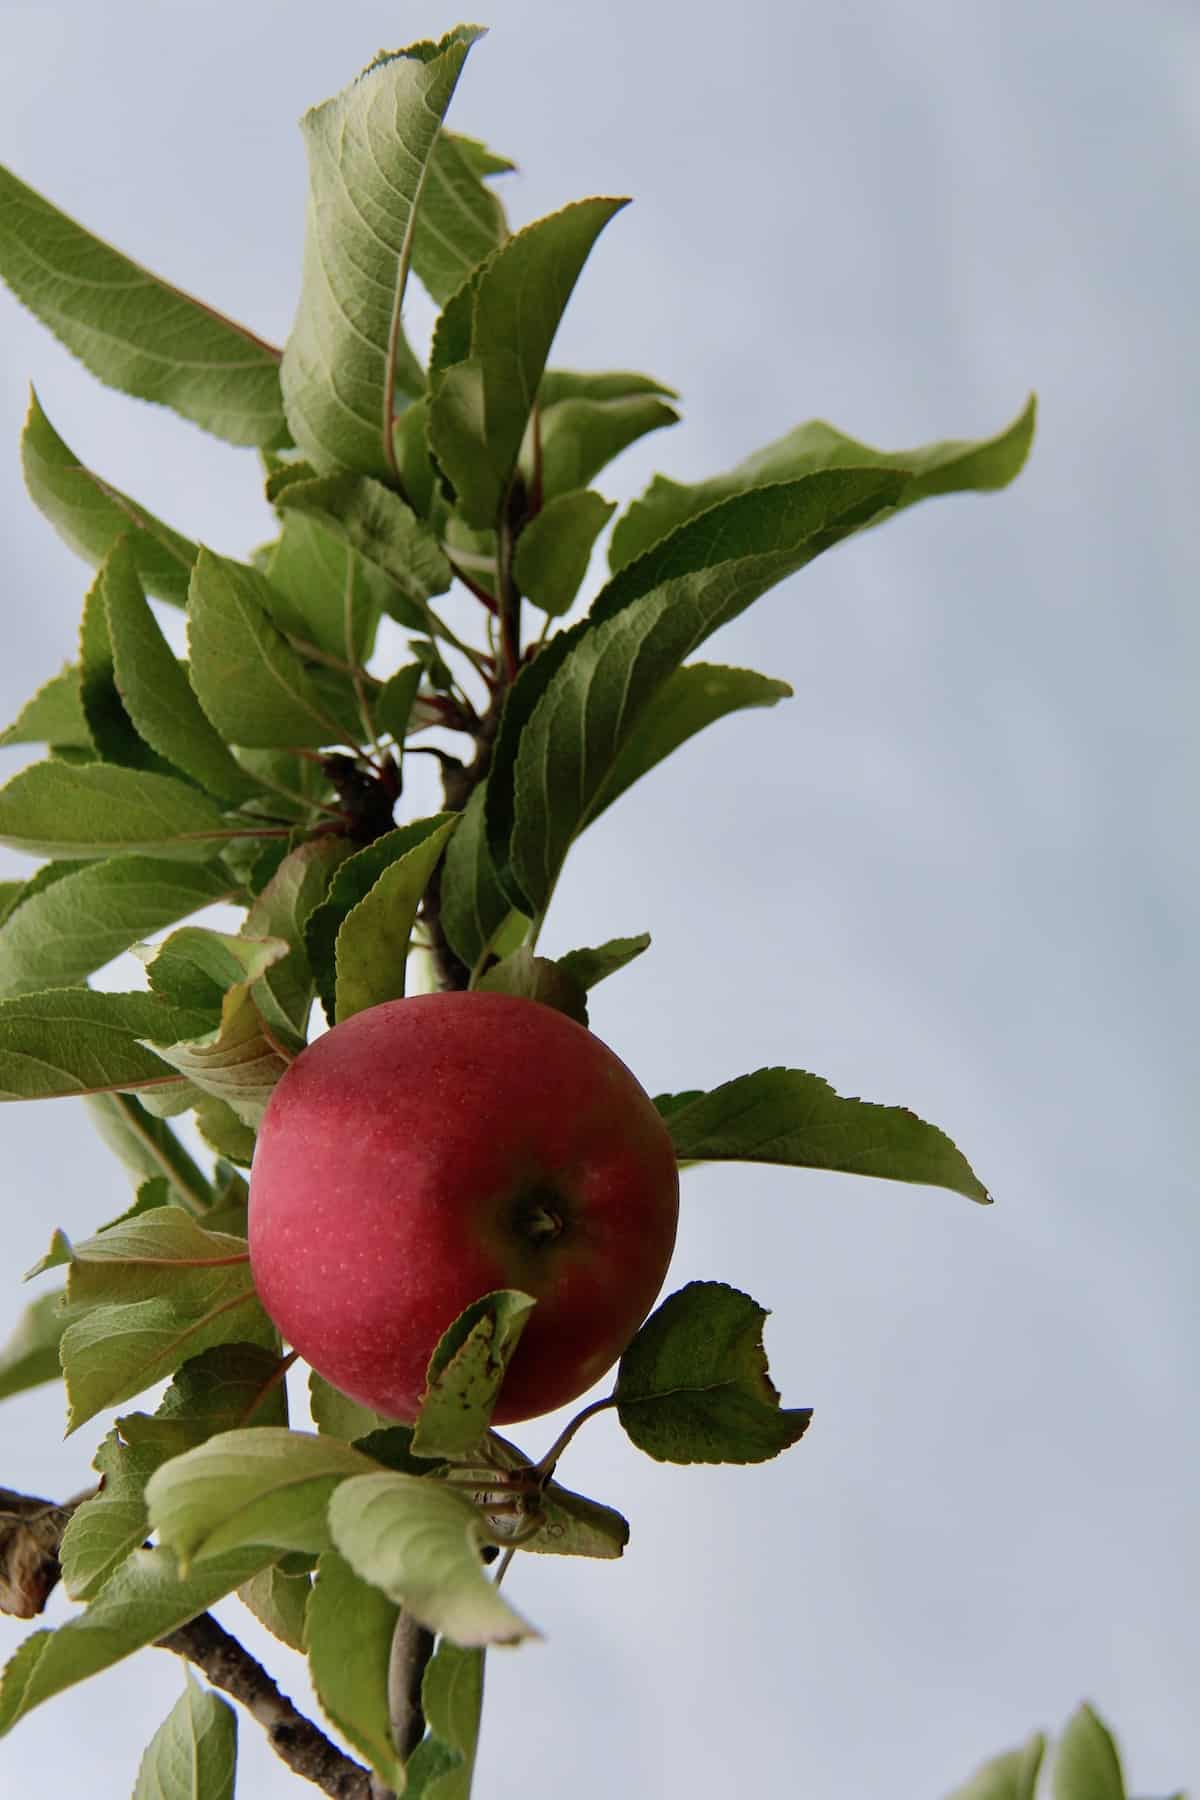 When is apple picking month - its September